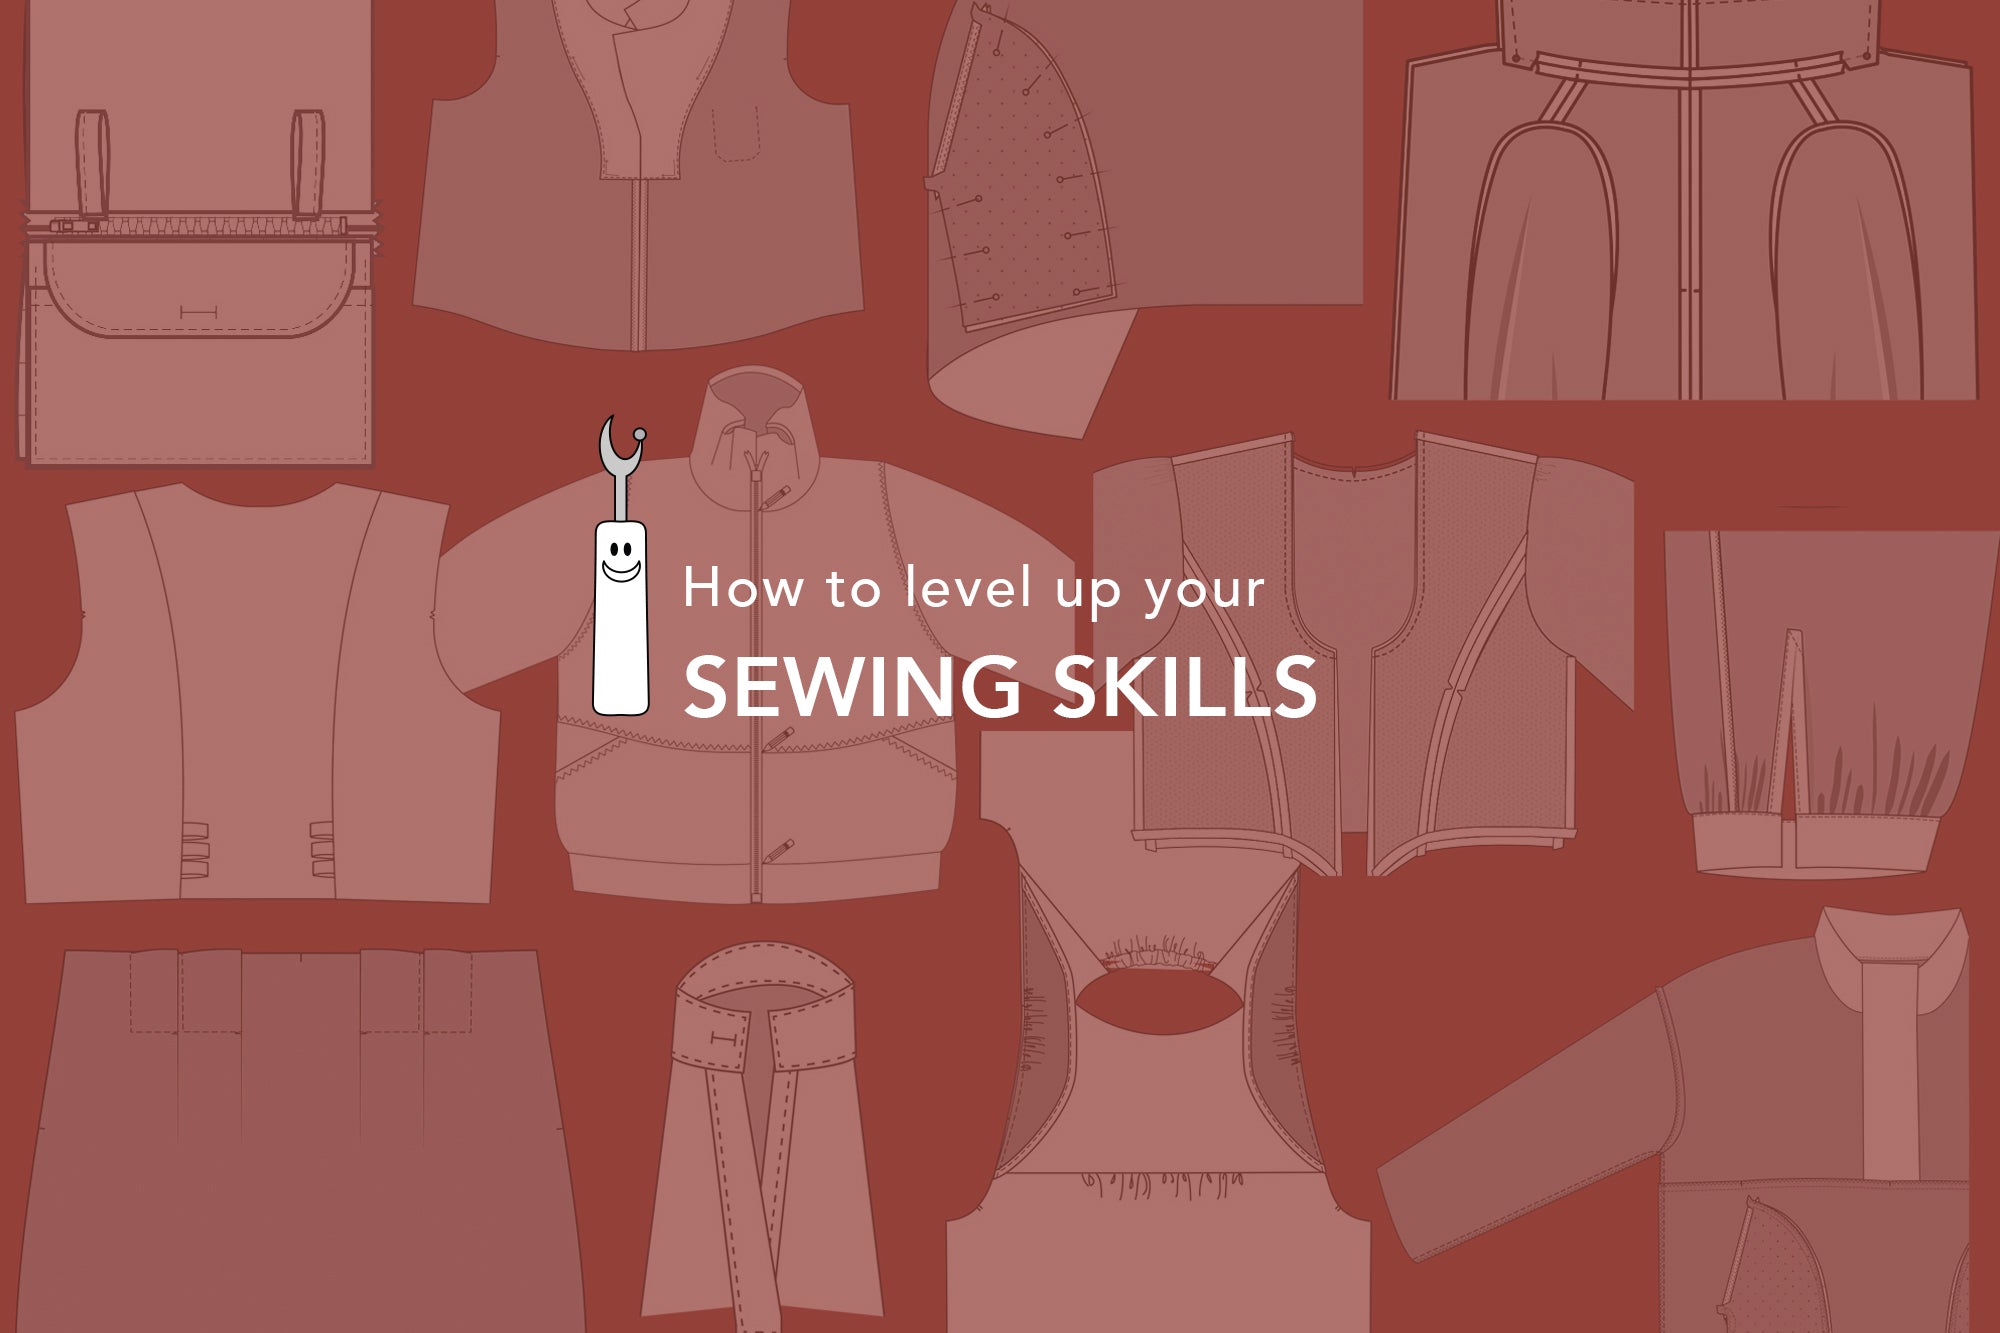 How To Sew An Open Seam: 5 Step Sewing Tutorial - The Creative Curator